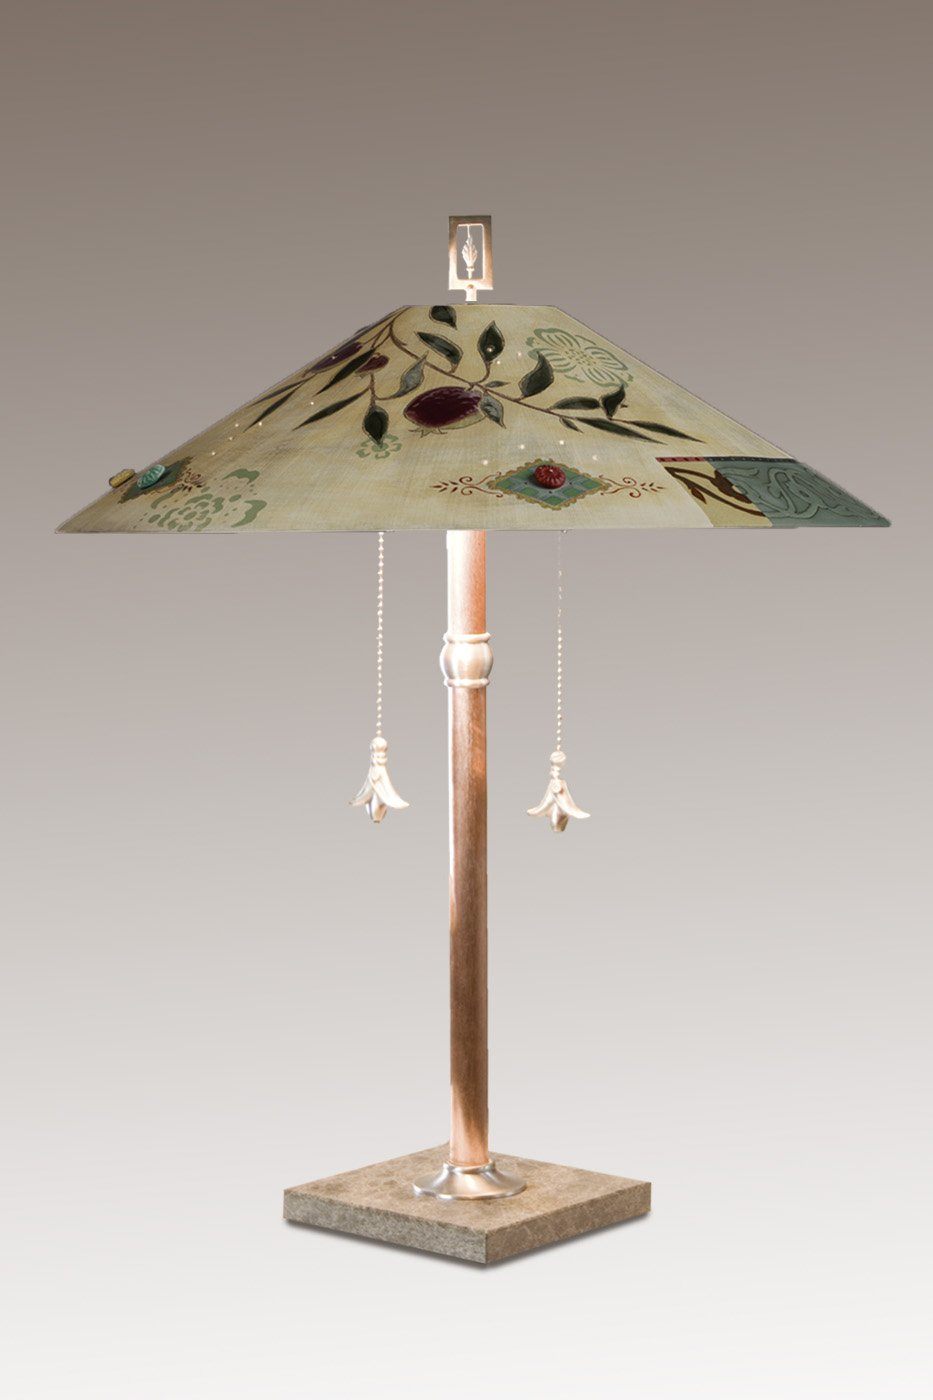 Copper Table Lamp with Large Wide Conical Ceramic Shade in Pomegranate